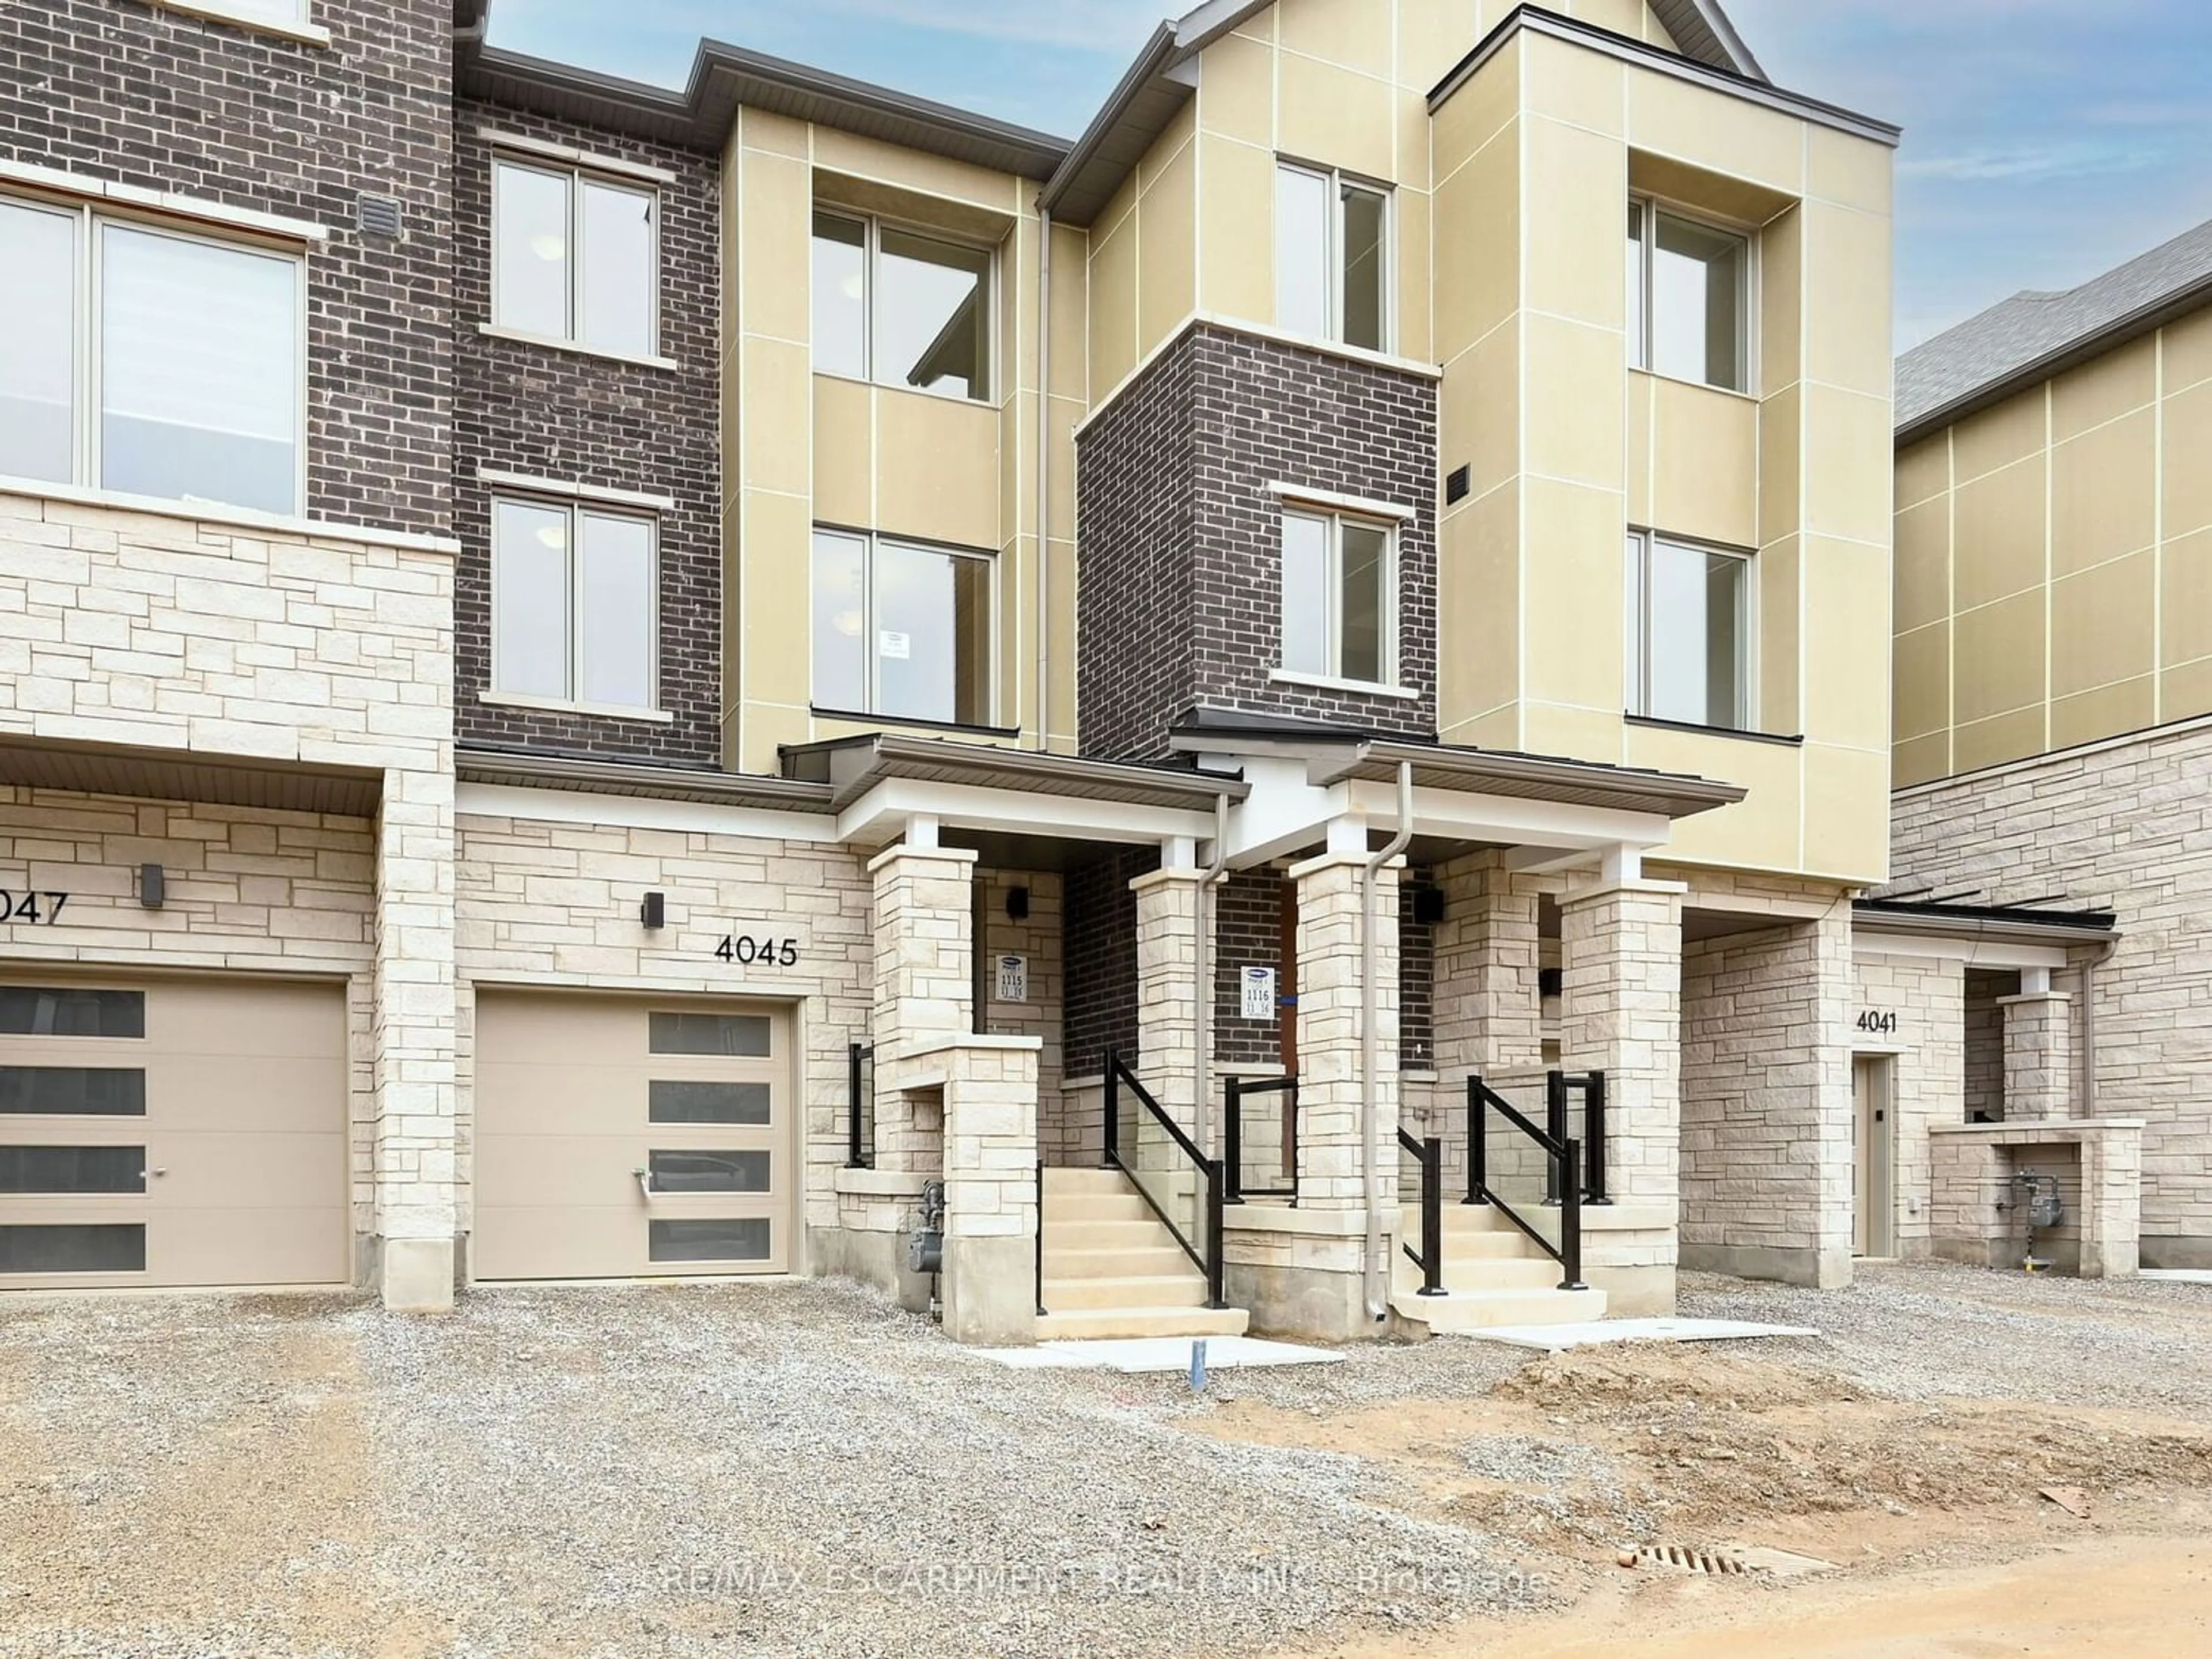 A pic from exterior of the house or condo for 4045 Saida St, Mississauga Ontario L5M 2S8